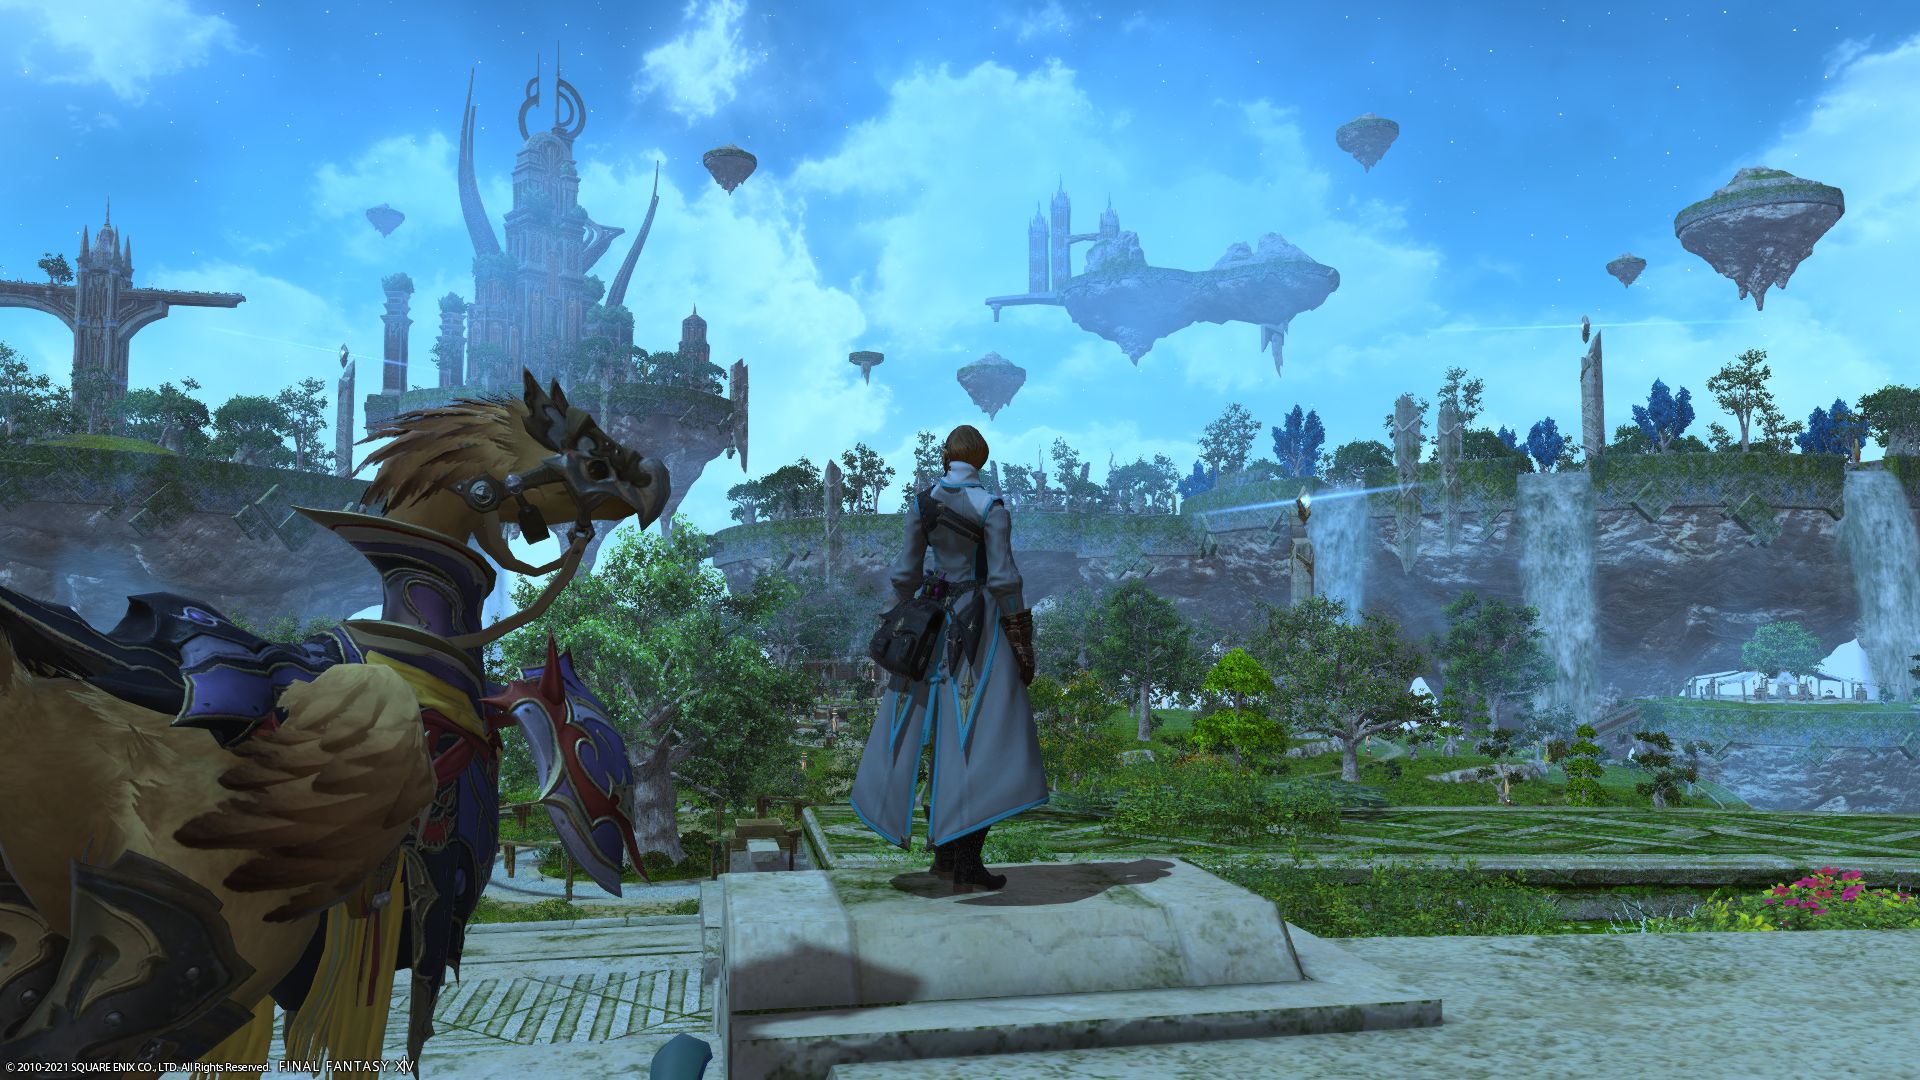 FF14 State of the Game - the player and nearby mount look out towards a bustling landscape under a blue sky